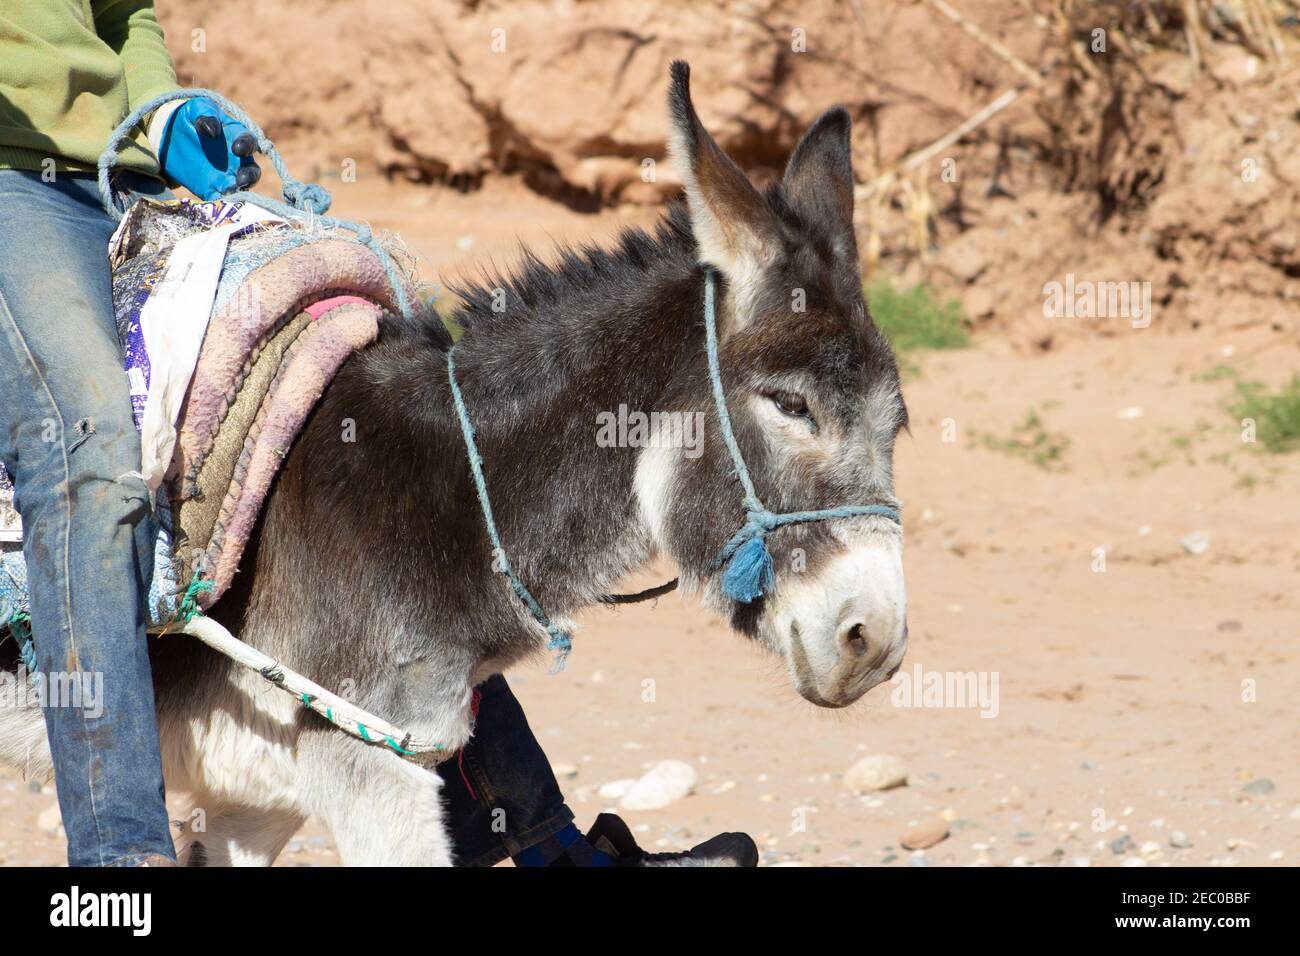 donkey with a blue rope halter with saddle and rider in blue jeans Stock Photo